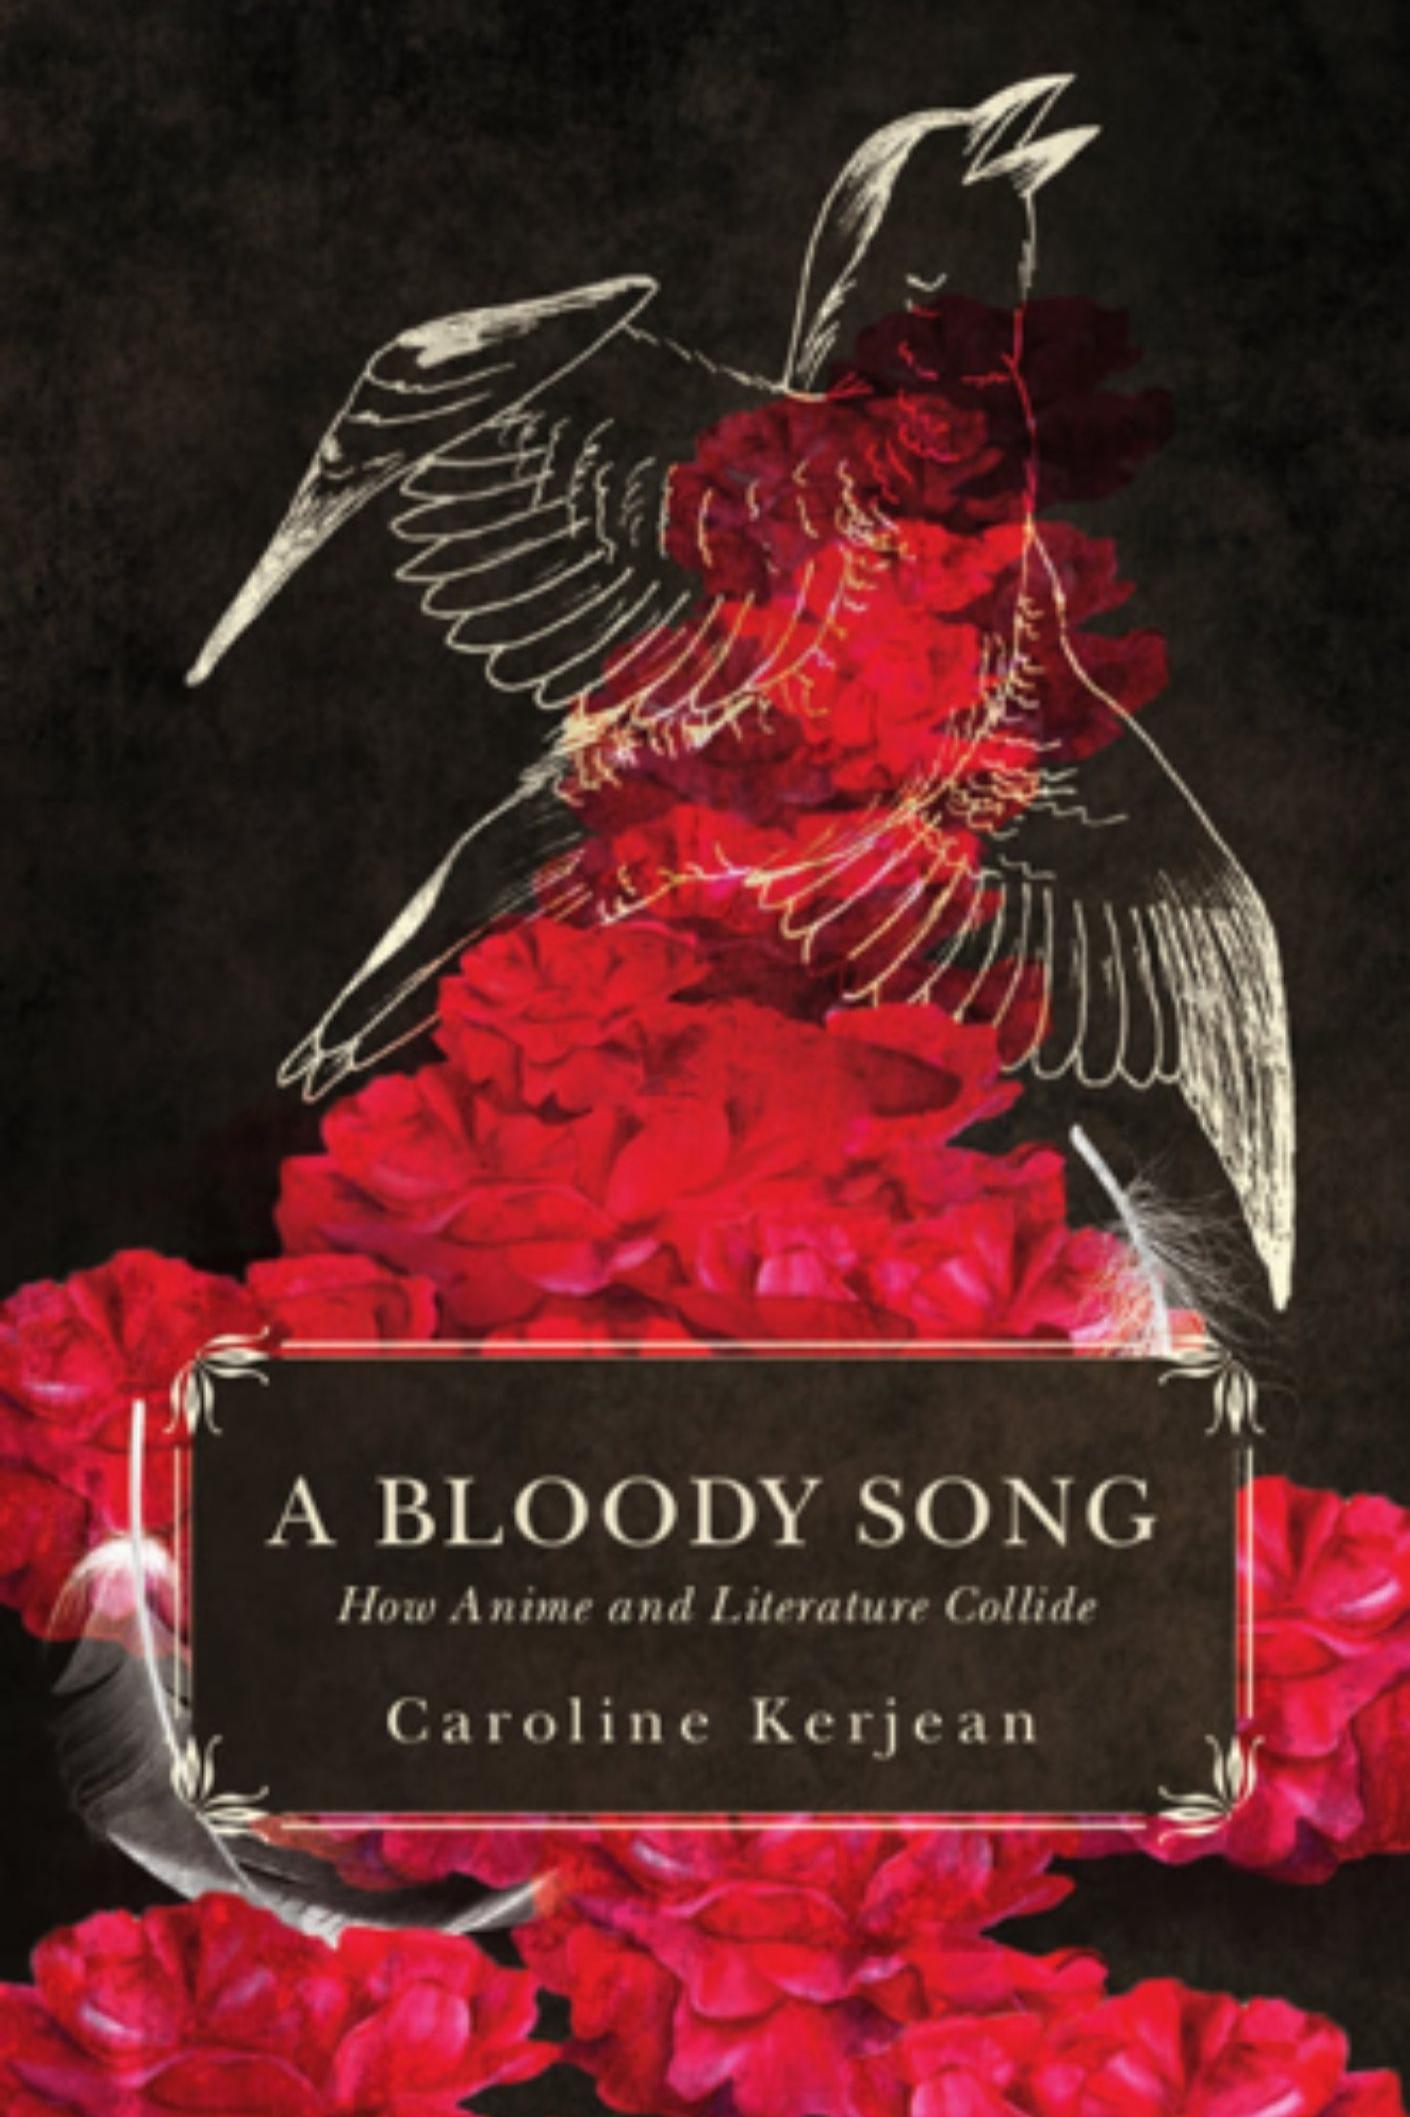 Book cover of A Bloody Song: How Anime and Literature Collide by Caroline Kerjean